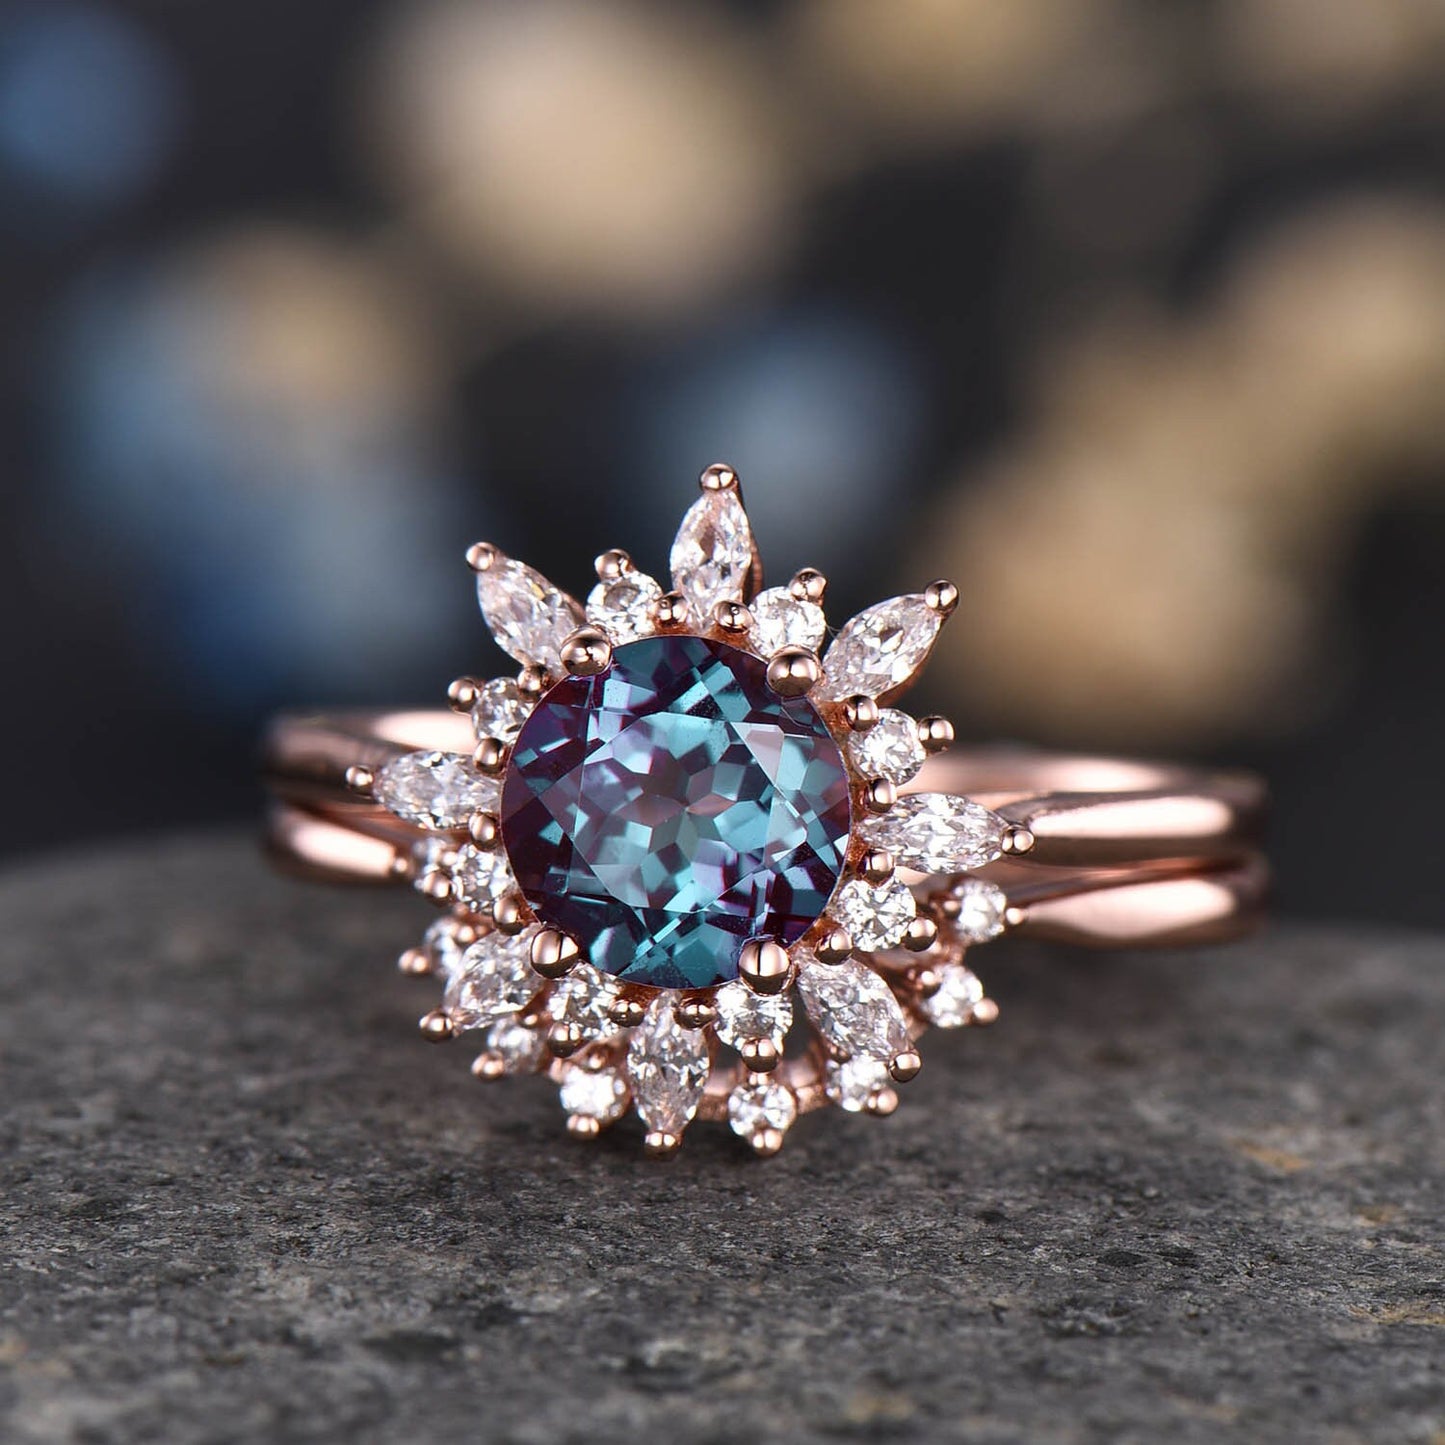 Alexandrite Engagement Ring Rose Gold Ring Diamond/ Moissanite Halo Promise Bridal Jewelry Antique Flower Style Plain Gold Band Gift For Her